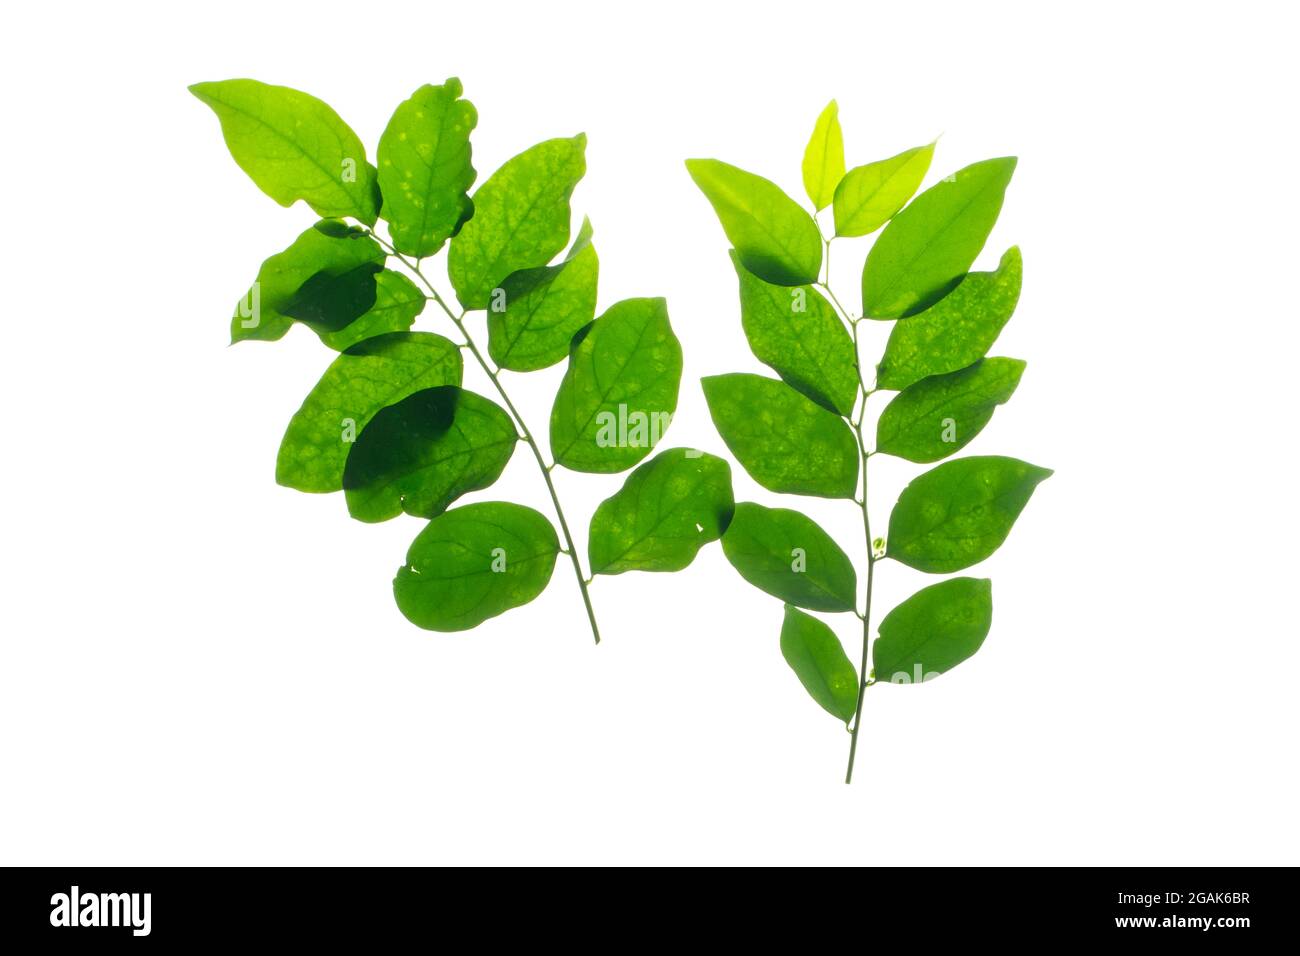 Tropical leaves foliage plant bush floral arrangement nature backdrop isolated on white background, clipping path included. Stock Photo